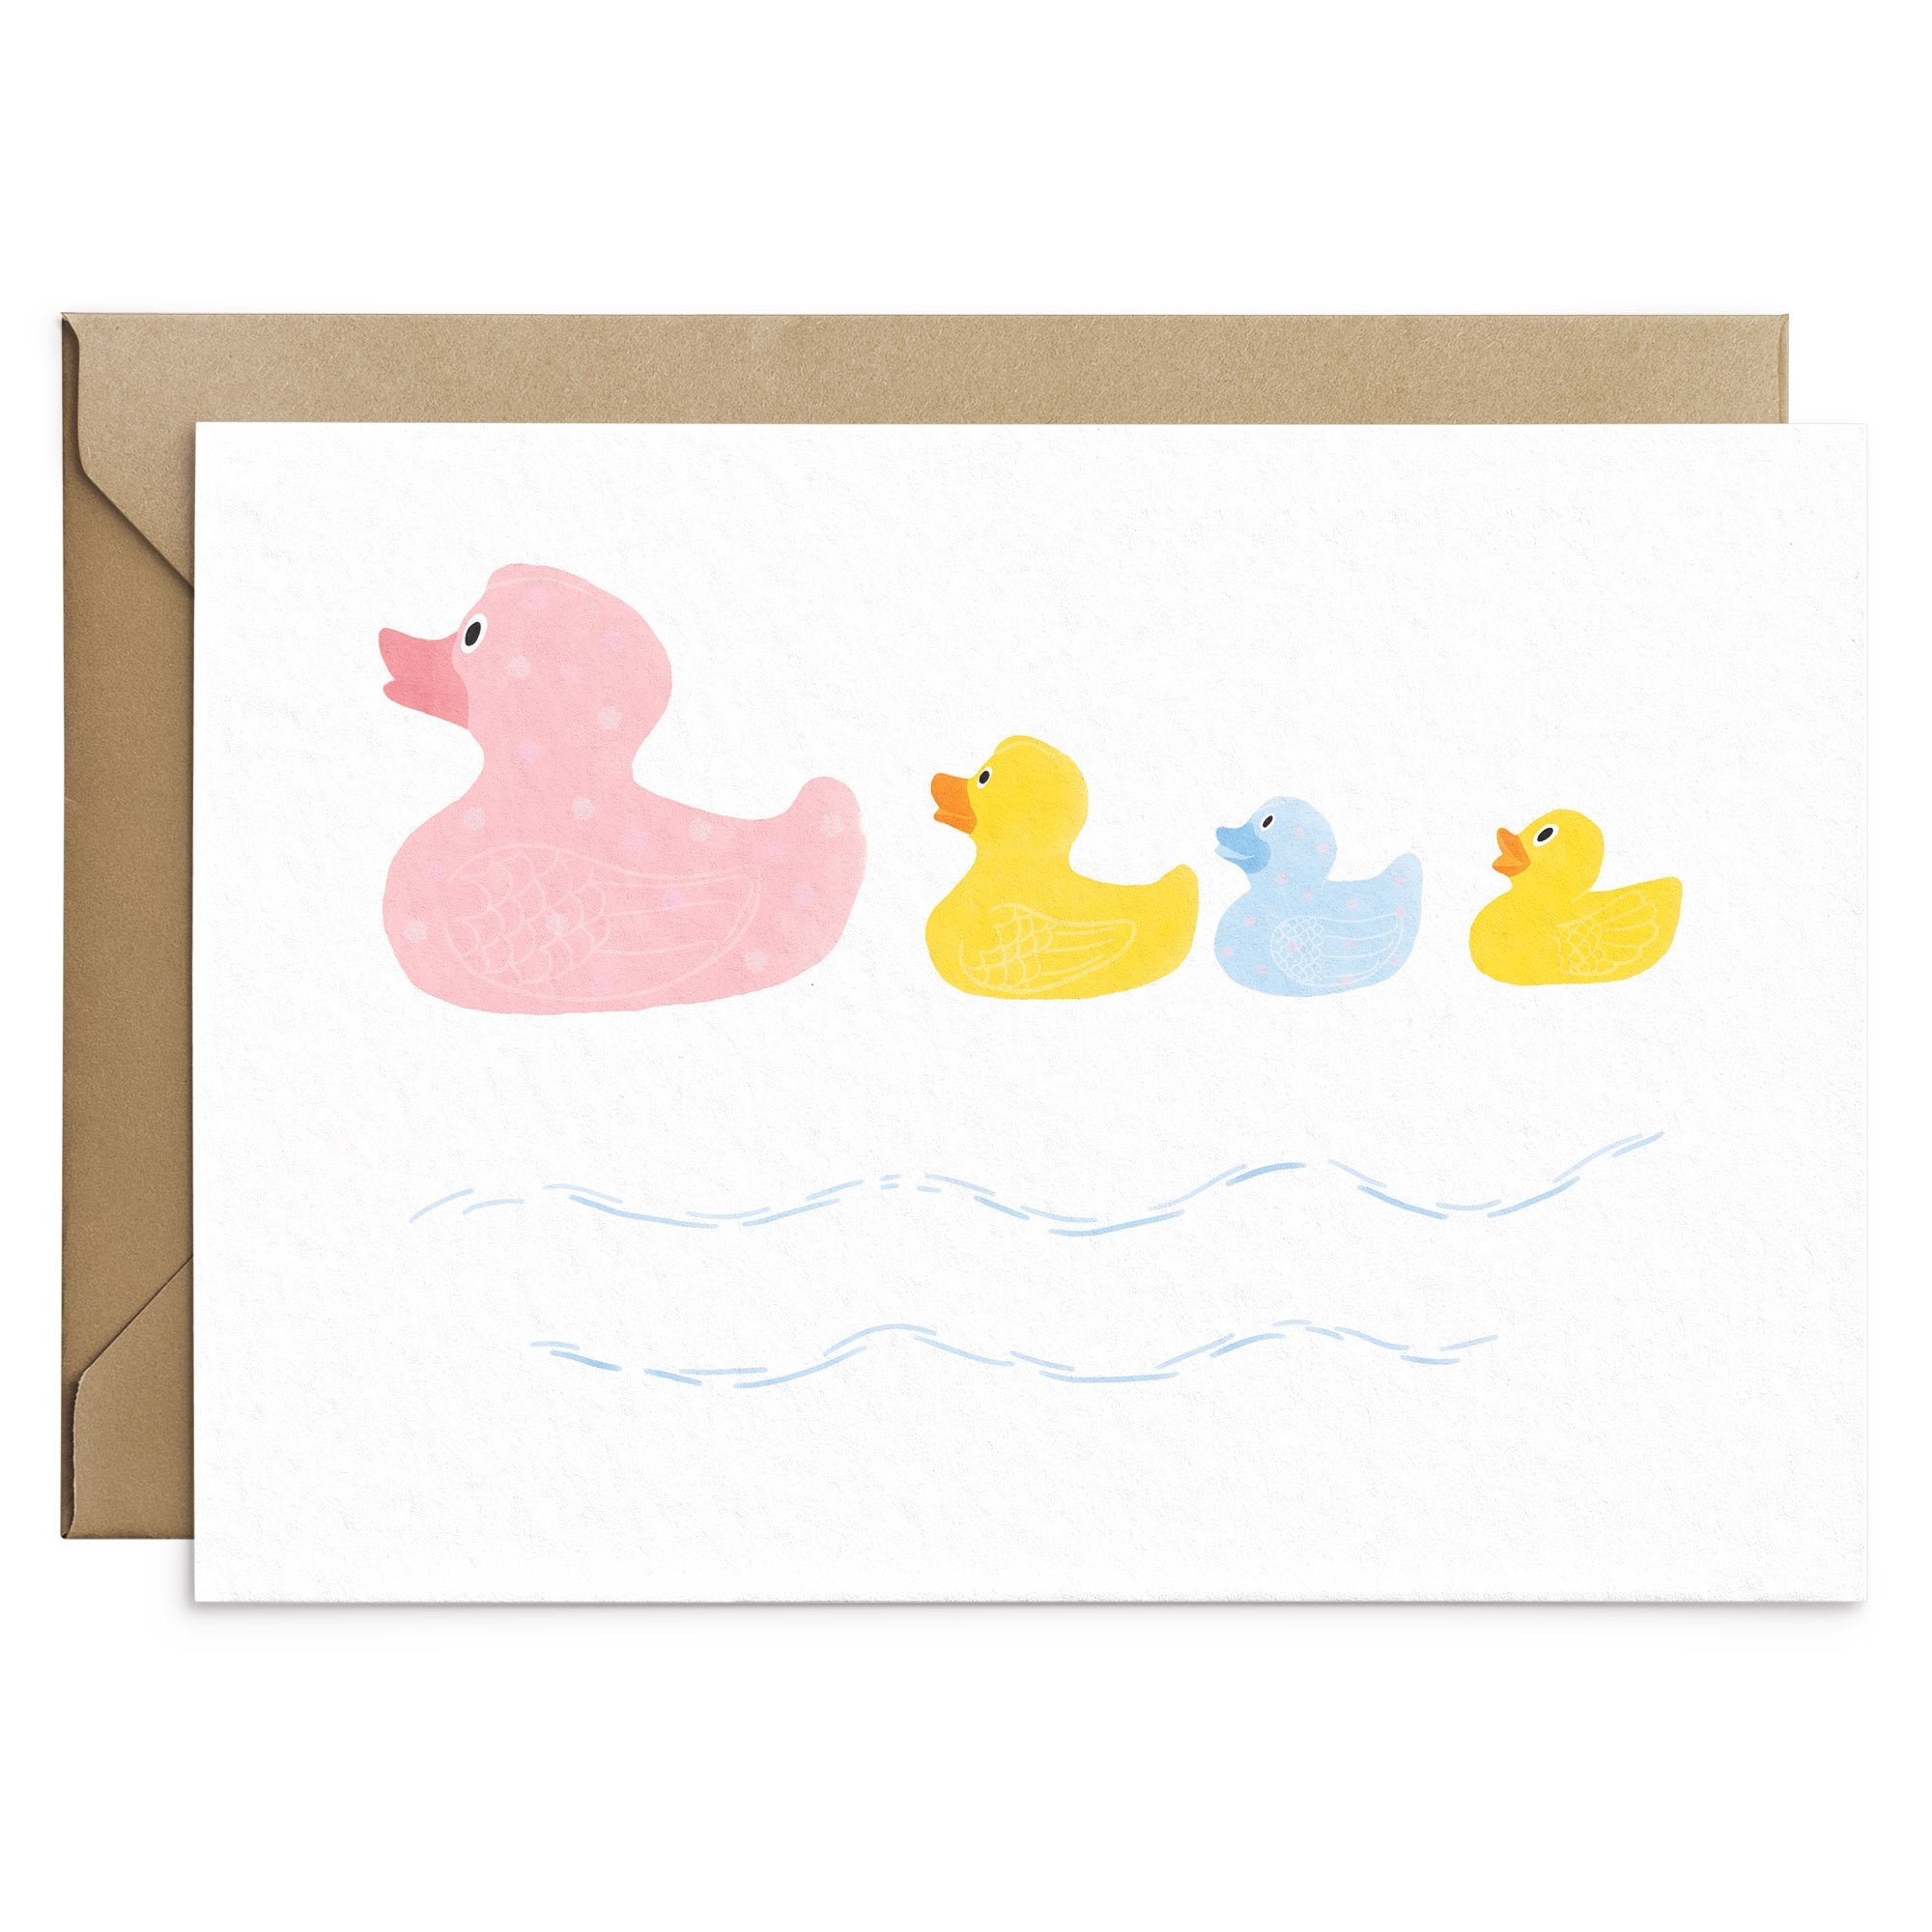 Large Rubber Duck - $19.99 : Ducks Only!, Exclusively Ducks